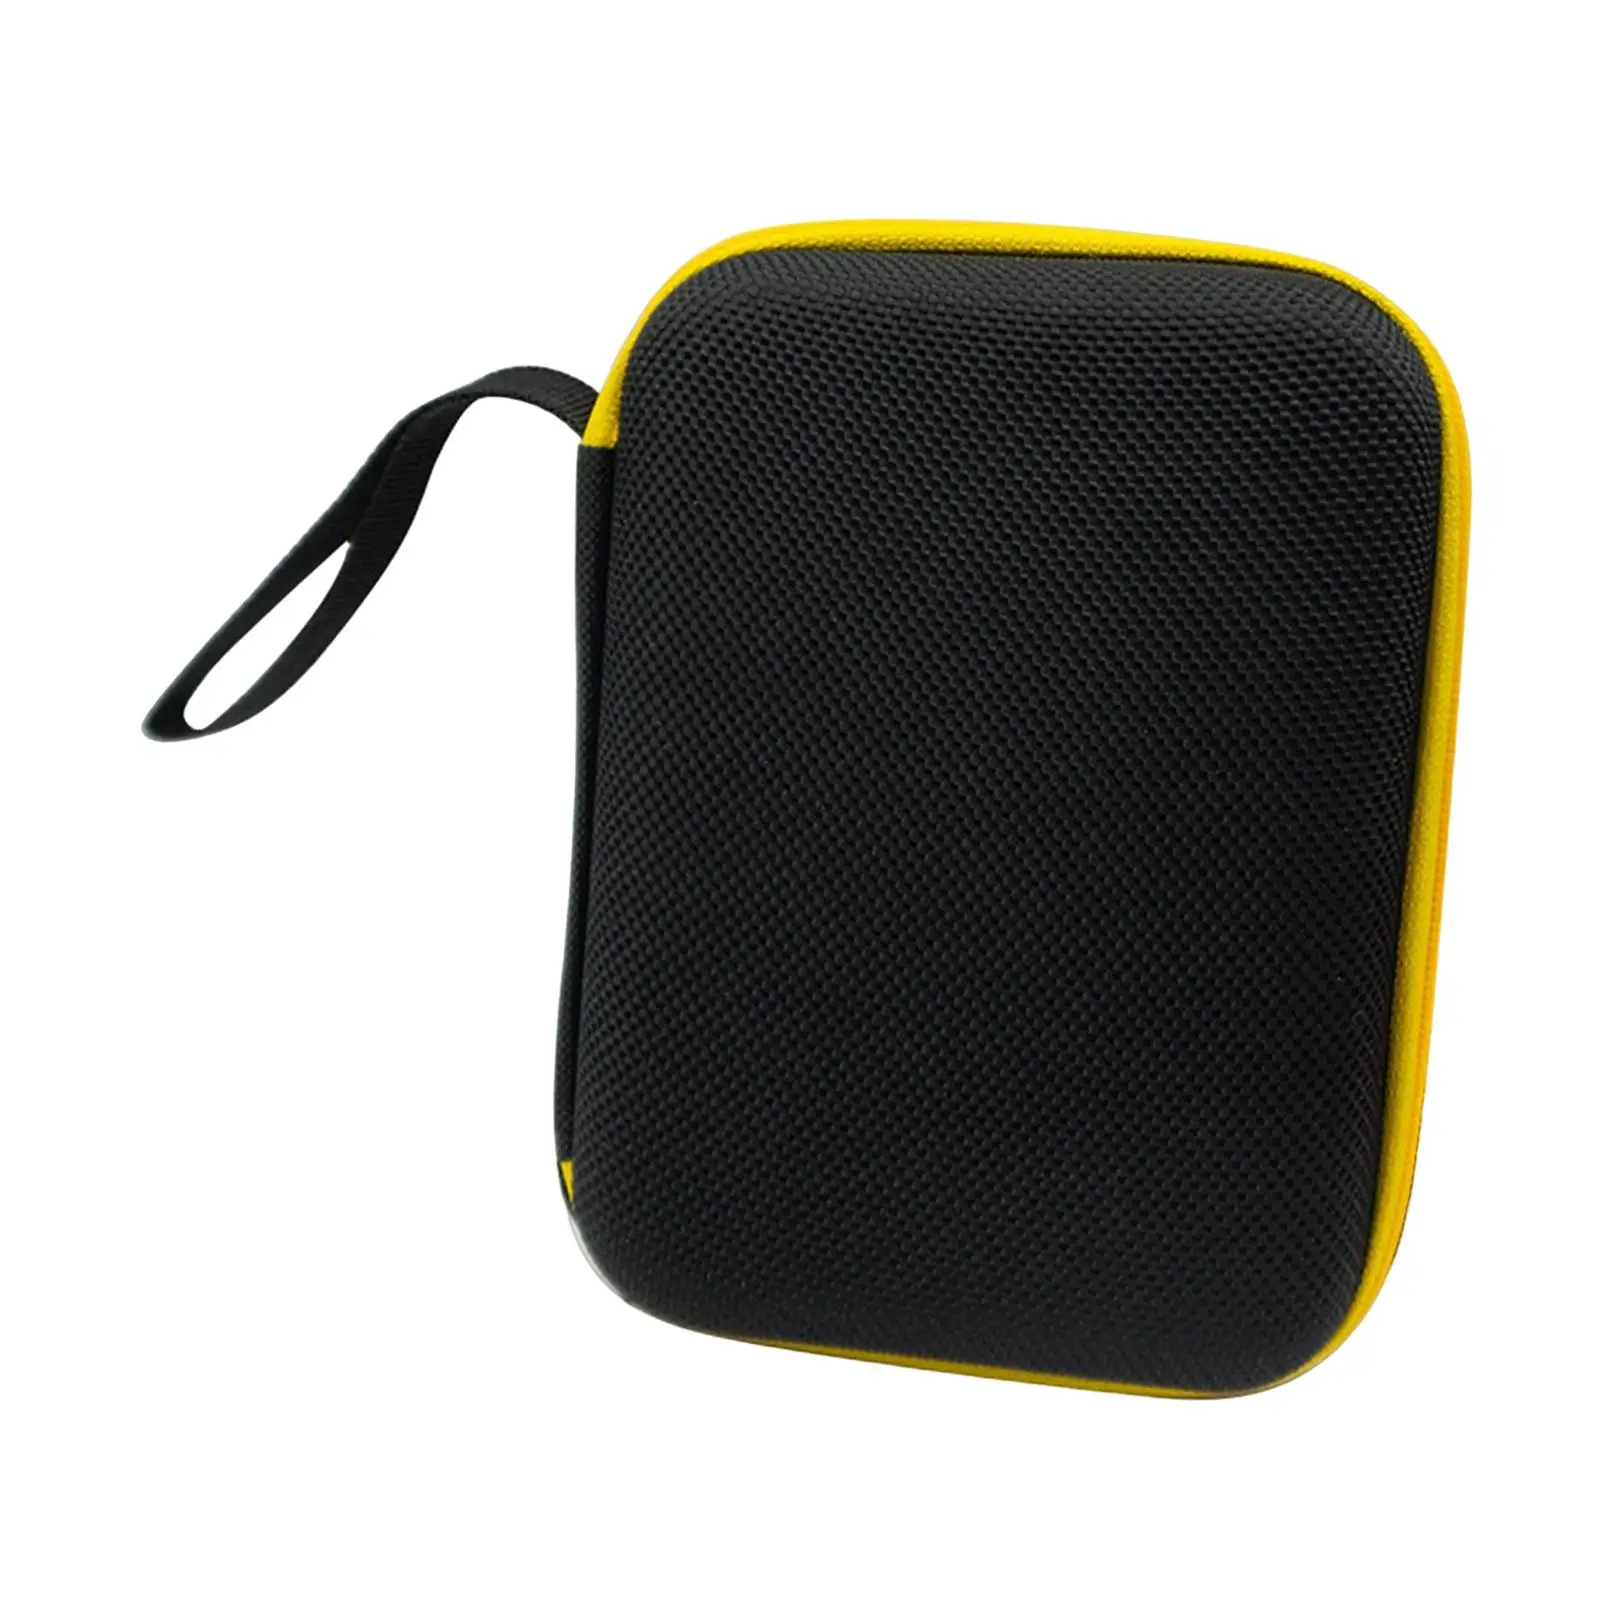 Handheld Game Console Case for Charging Cable Headphones Travel Bag Game Machine Accessories Handheld Game Console Carrying Case